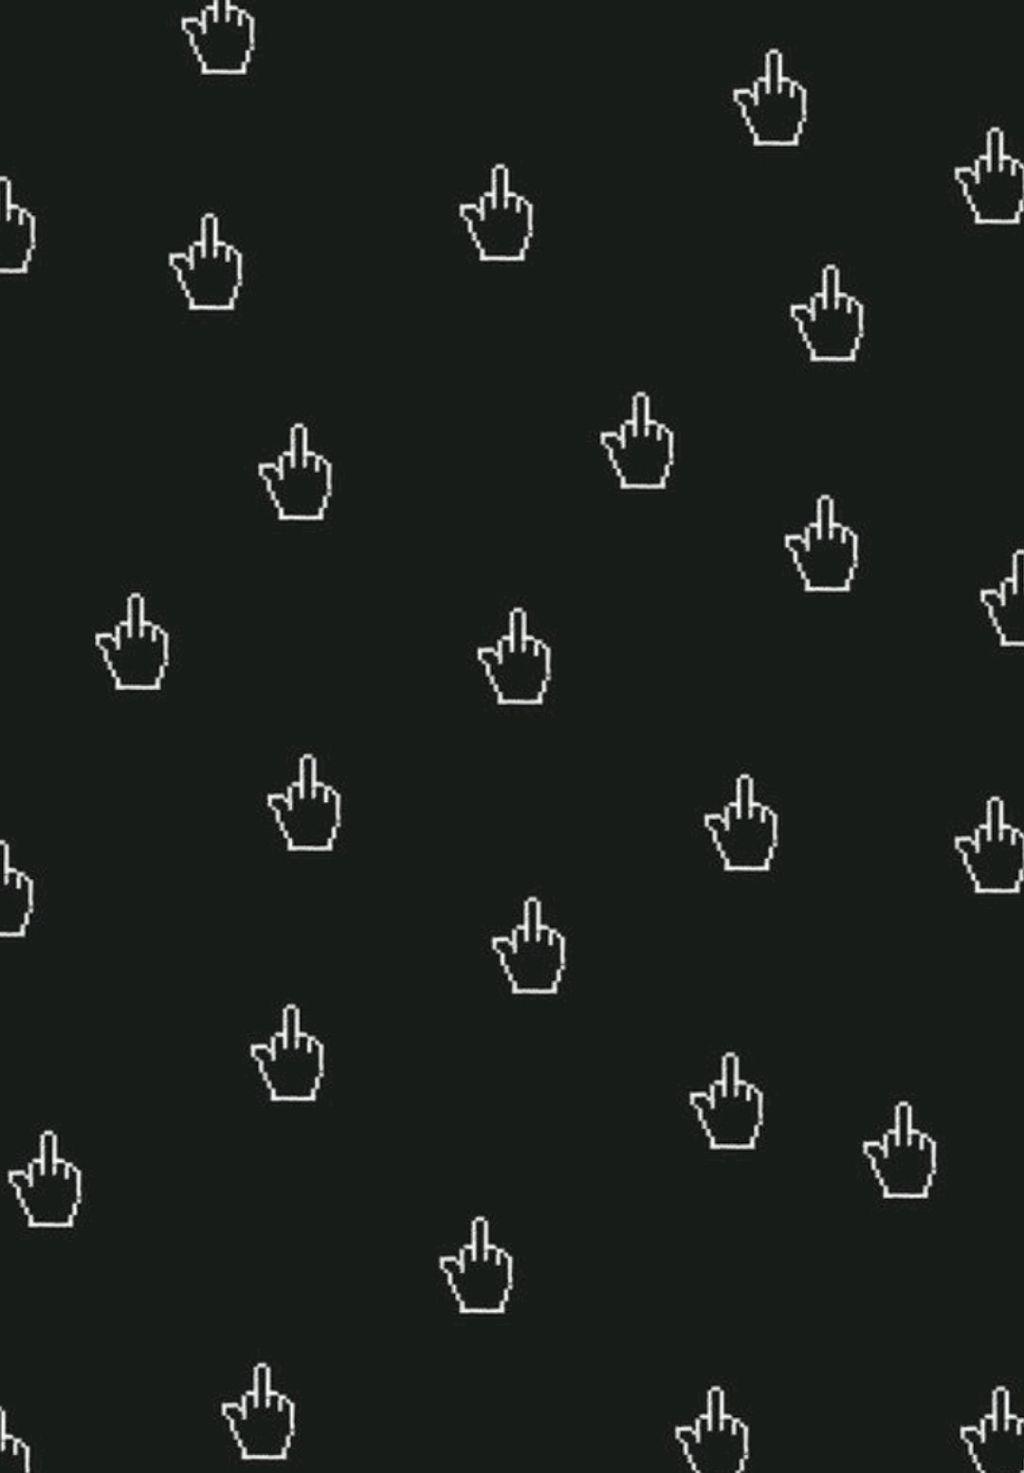 HD Middle Finger Wallpaper - KoLPaPer - Awesome Free HD Wallpapers